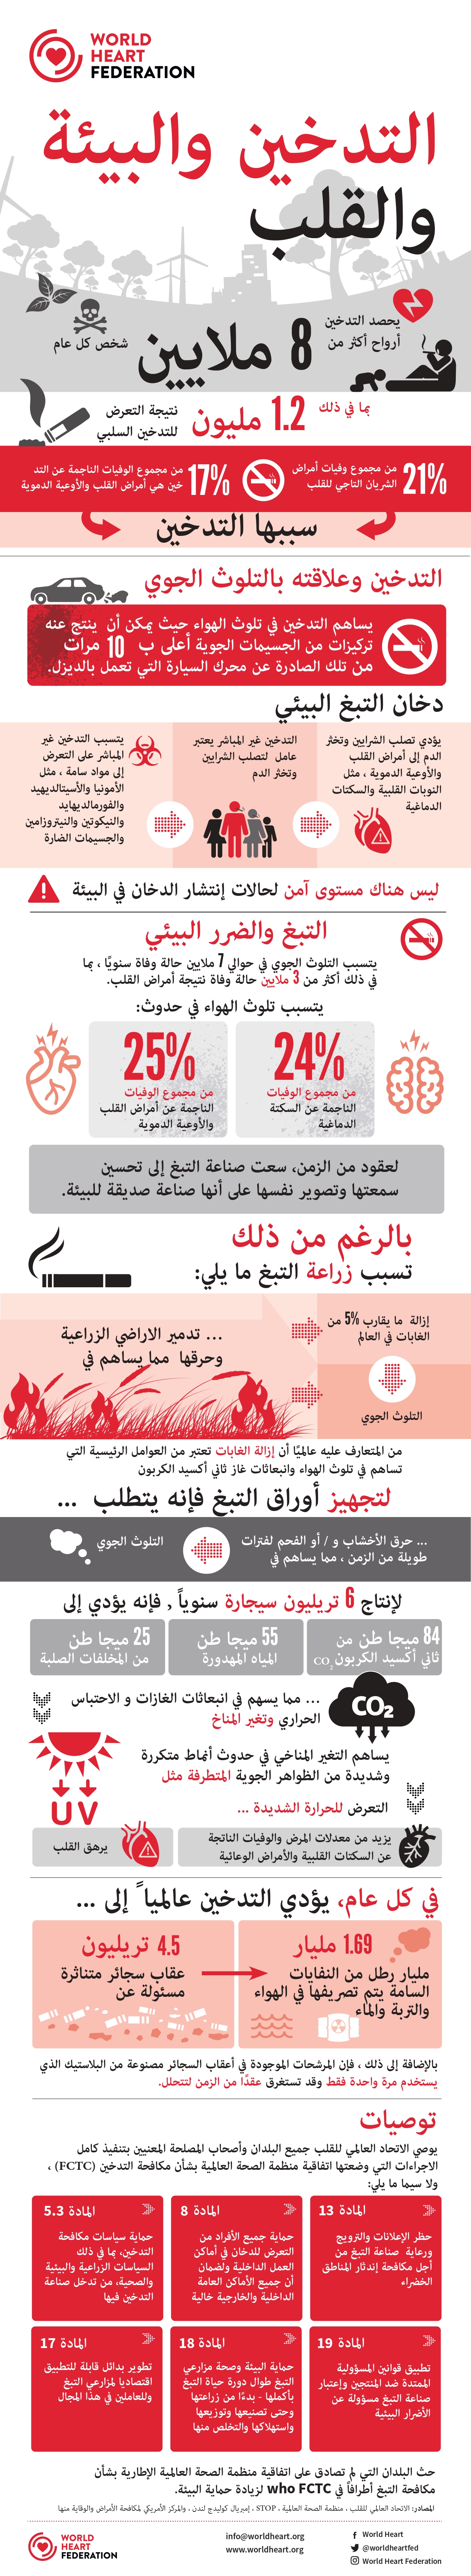 World Heart Federation Tobacco and the Heart infographic in Arabic